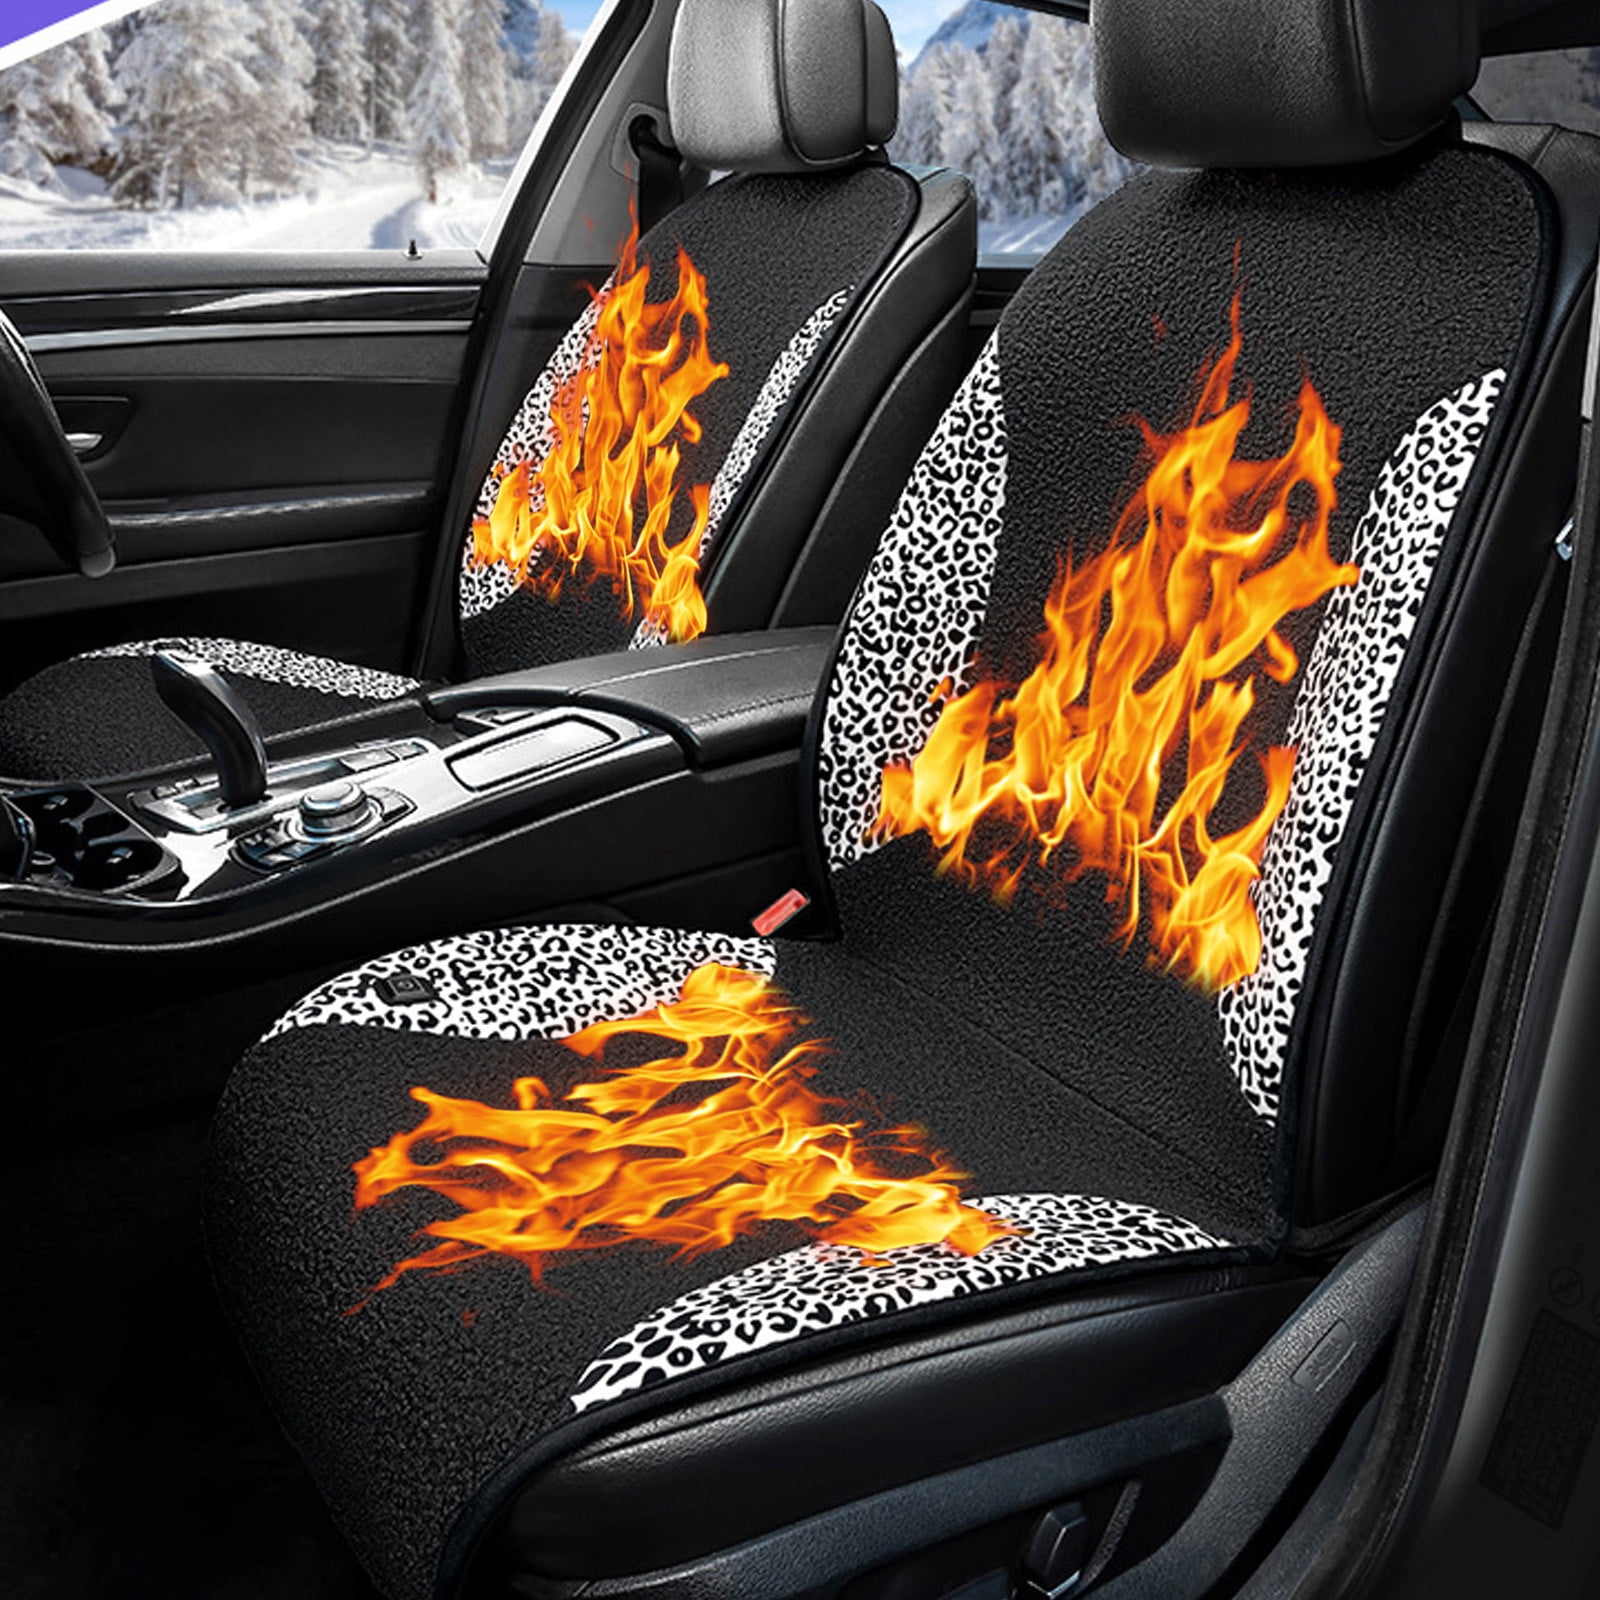 Seat Cushion with Heat:Winter Heated Seat Cover with Fast Heating